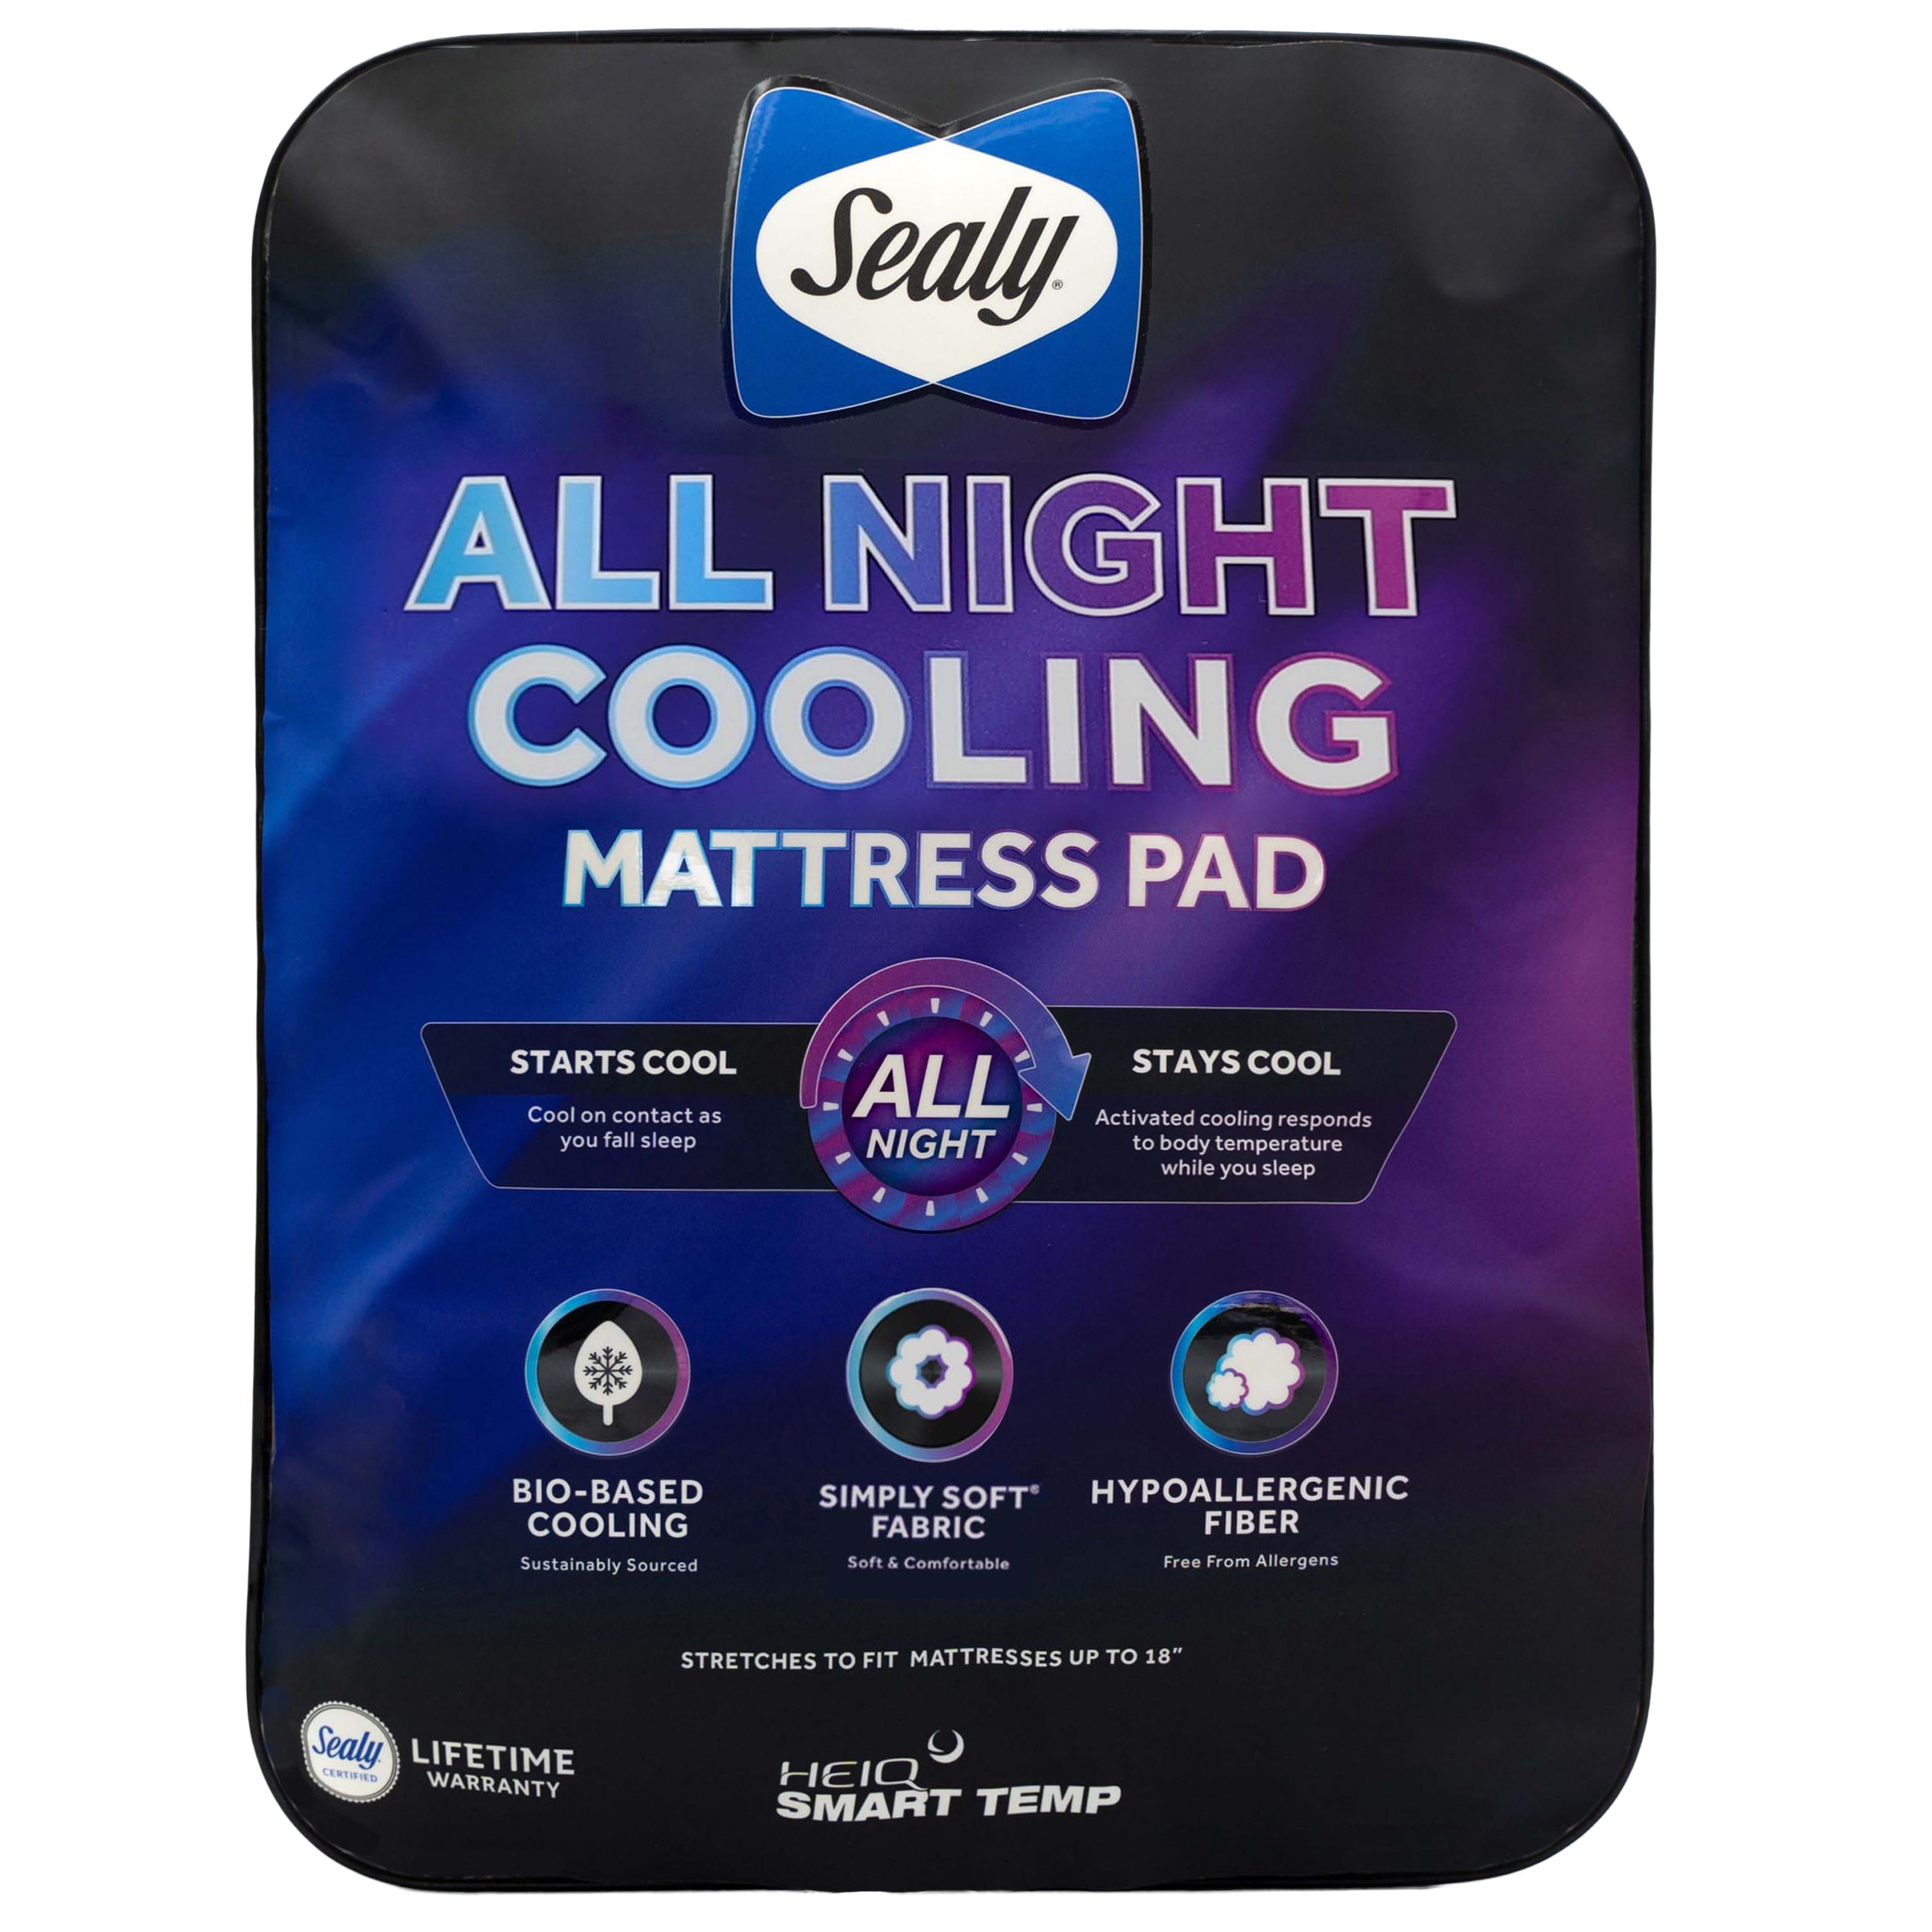 Magic Cooling Cool Gel Mat For Hot Weathers Improved Sleep Hot Head Feet Relief 